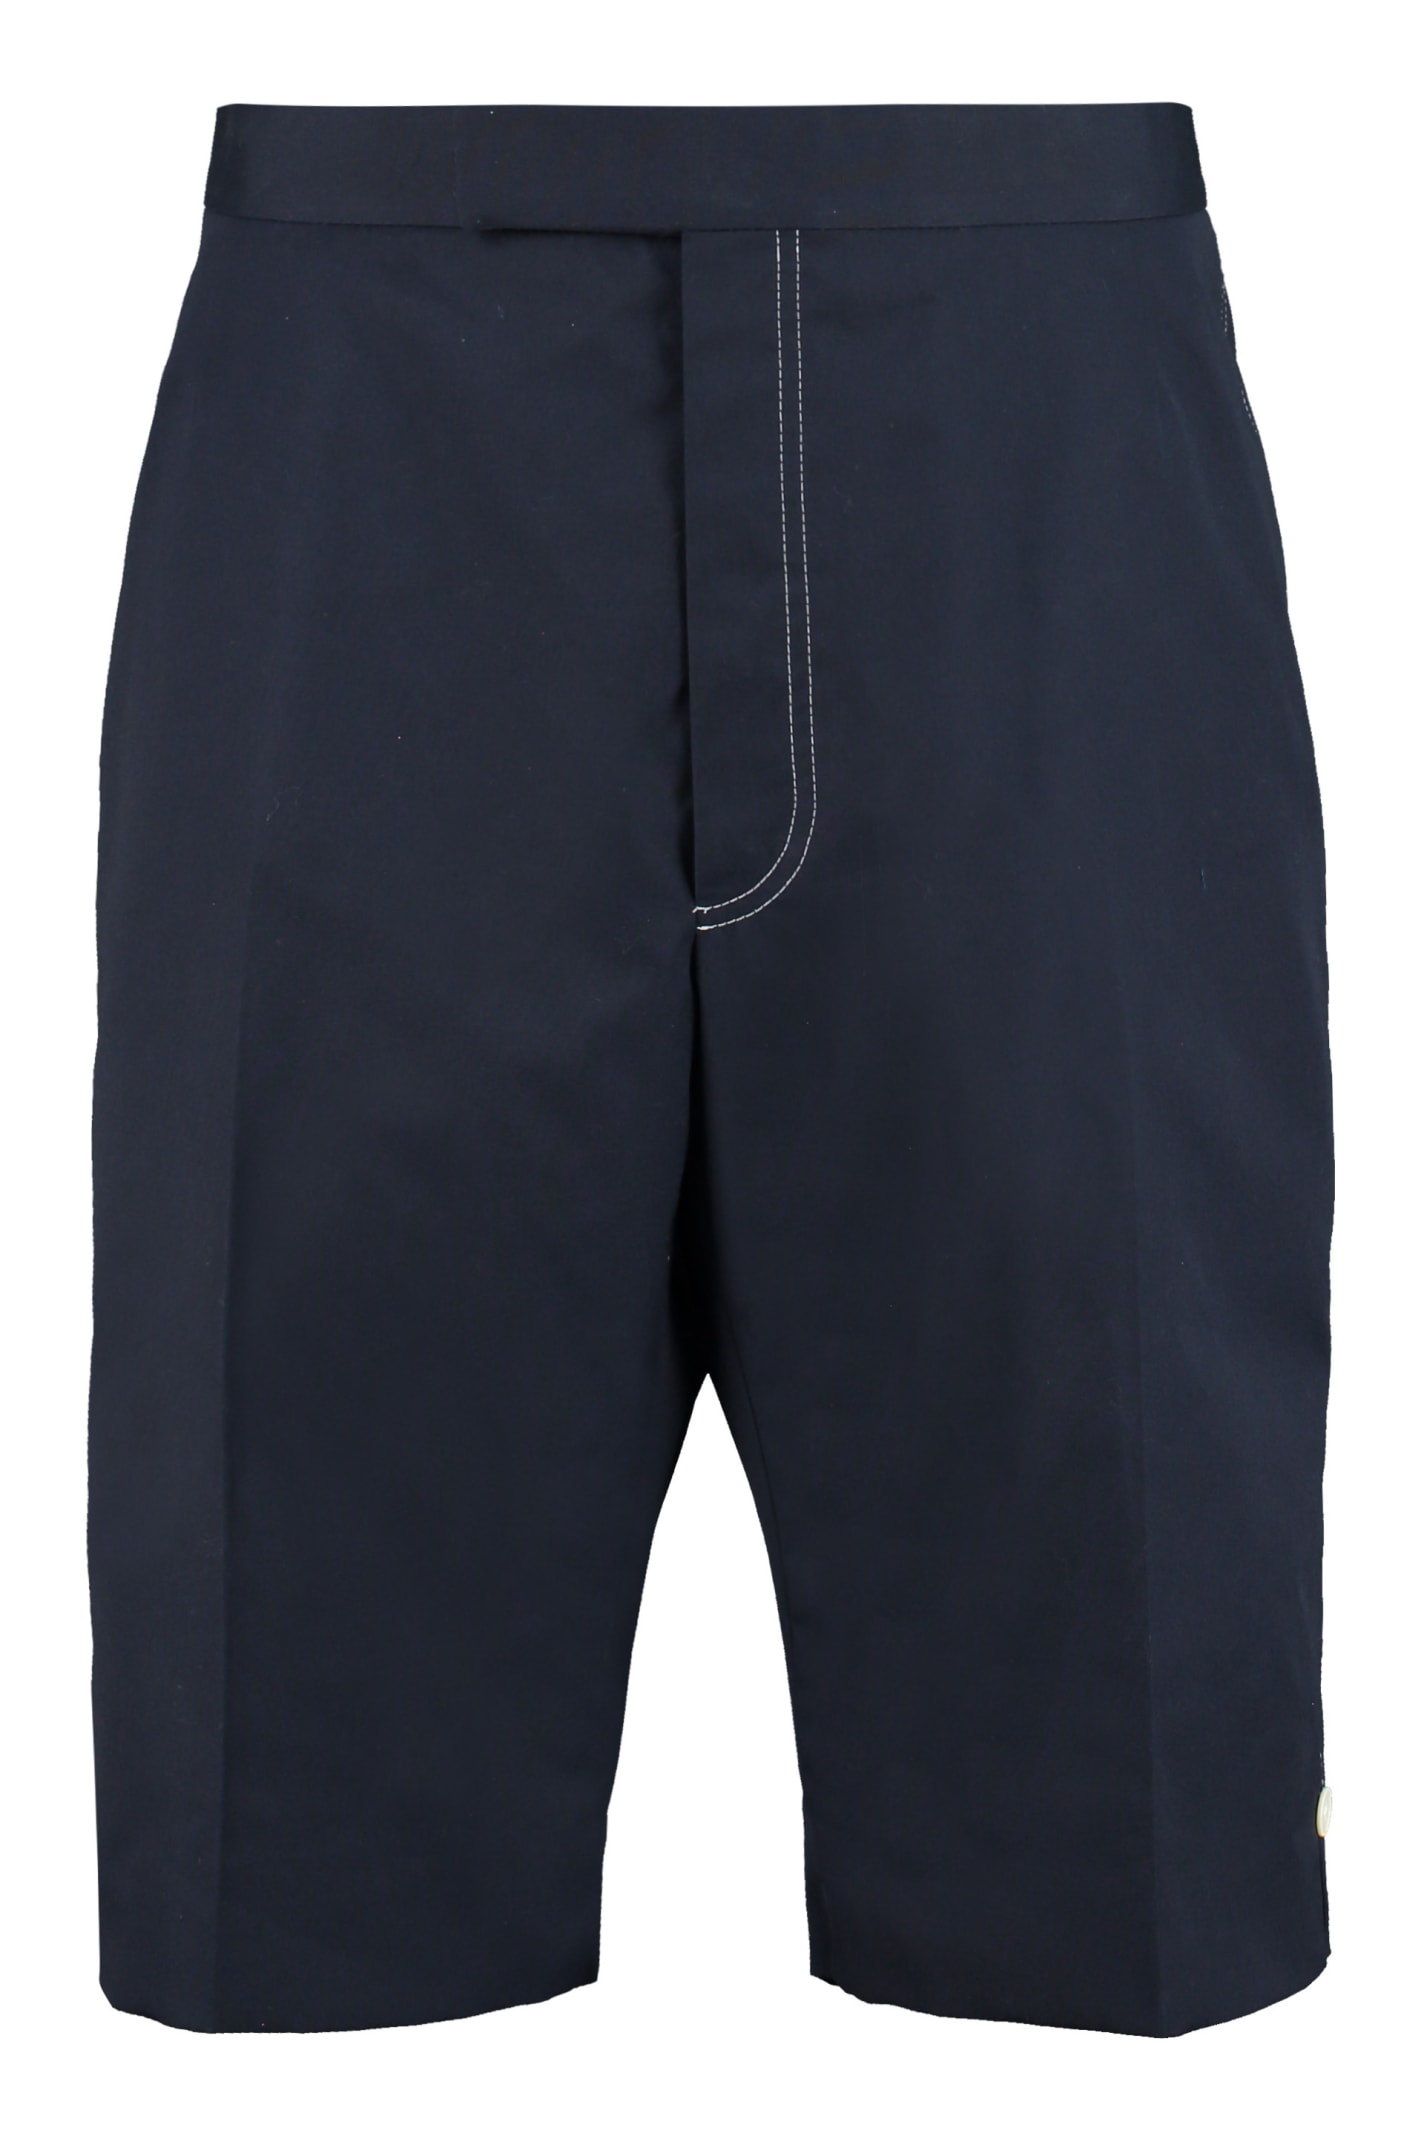 Thom Browne Short Chino Trousers